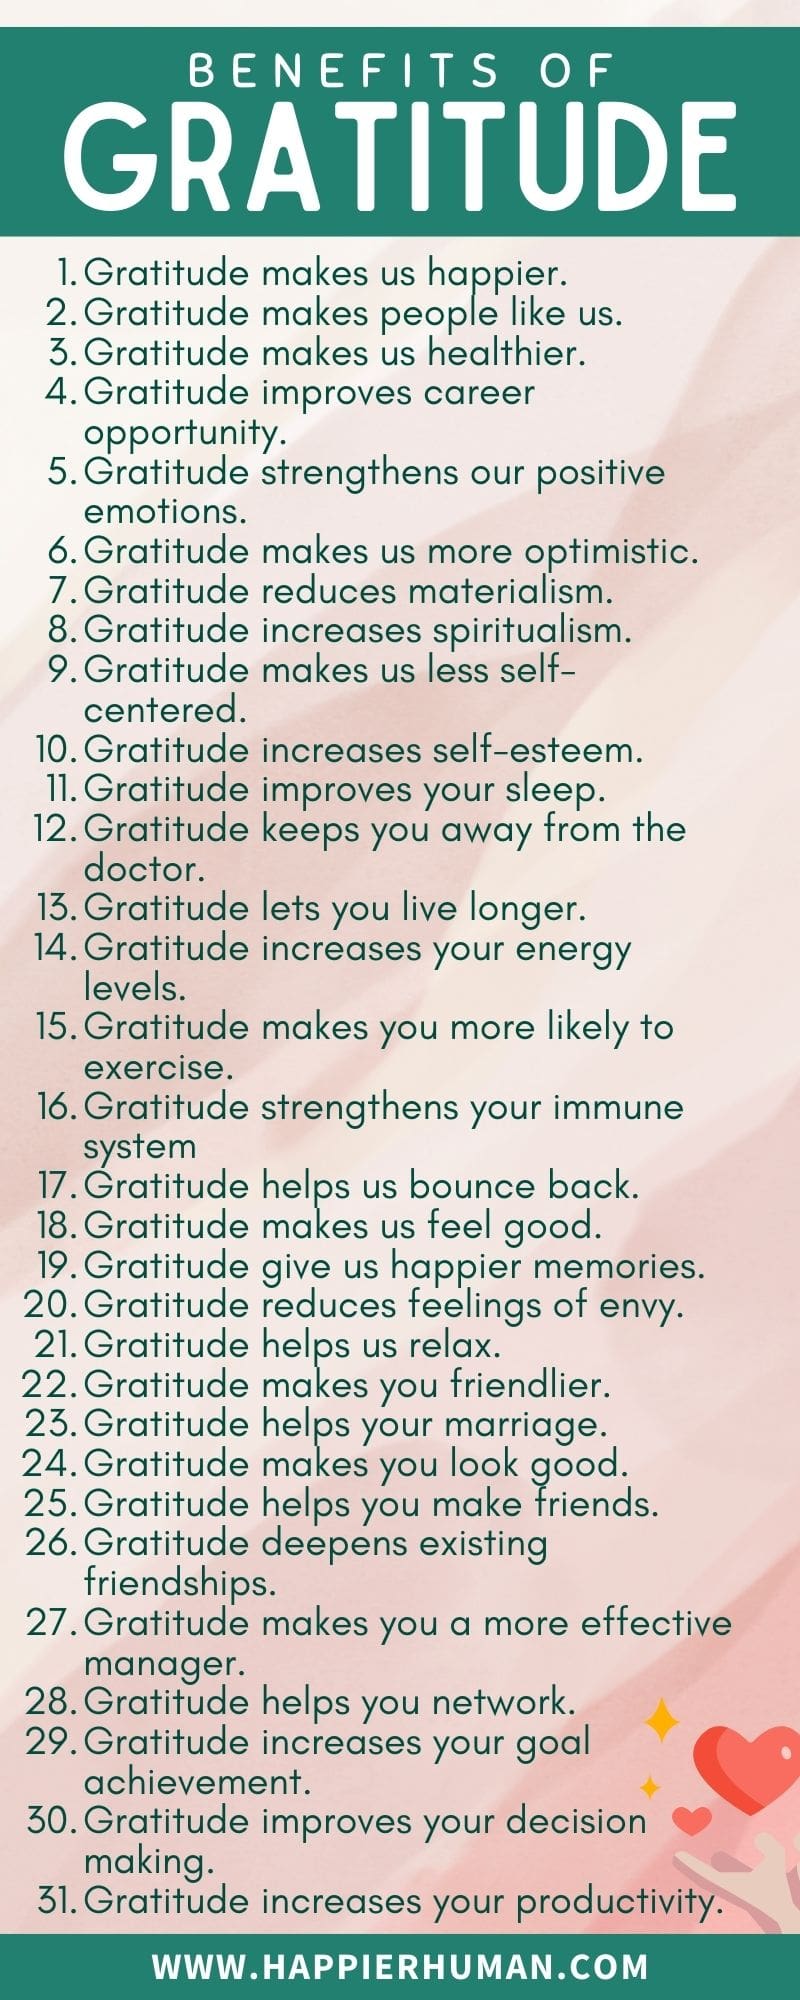 benefits of gratitude for students | benefits of gratitude pdf | benefits of gratitude in the workplace